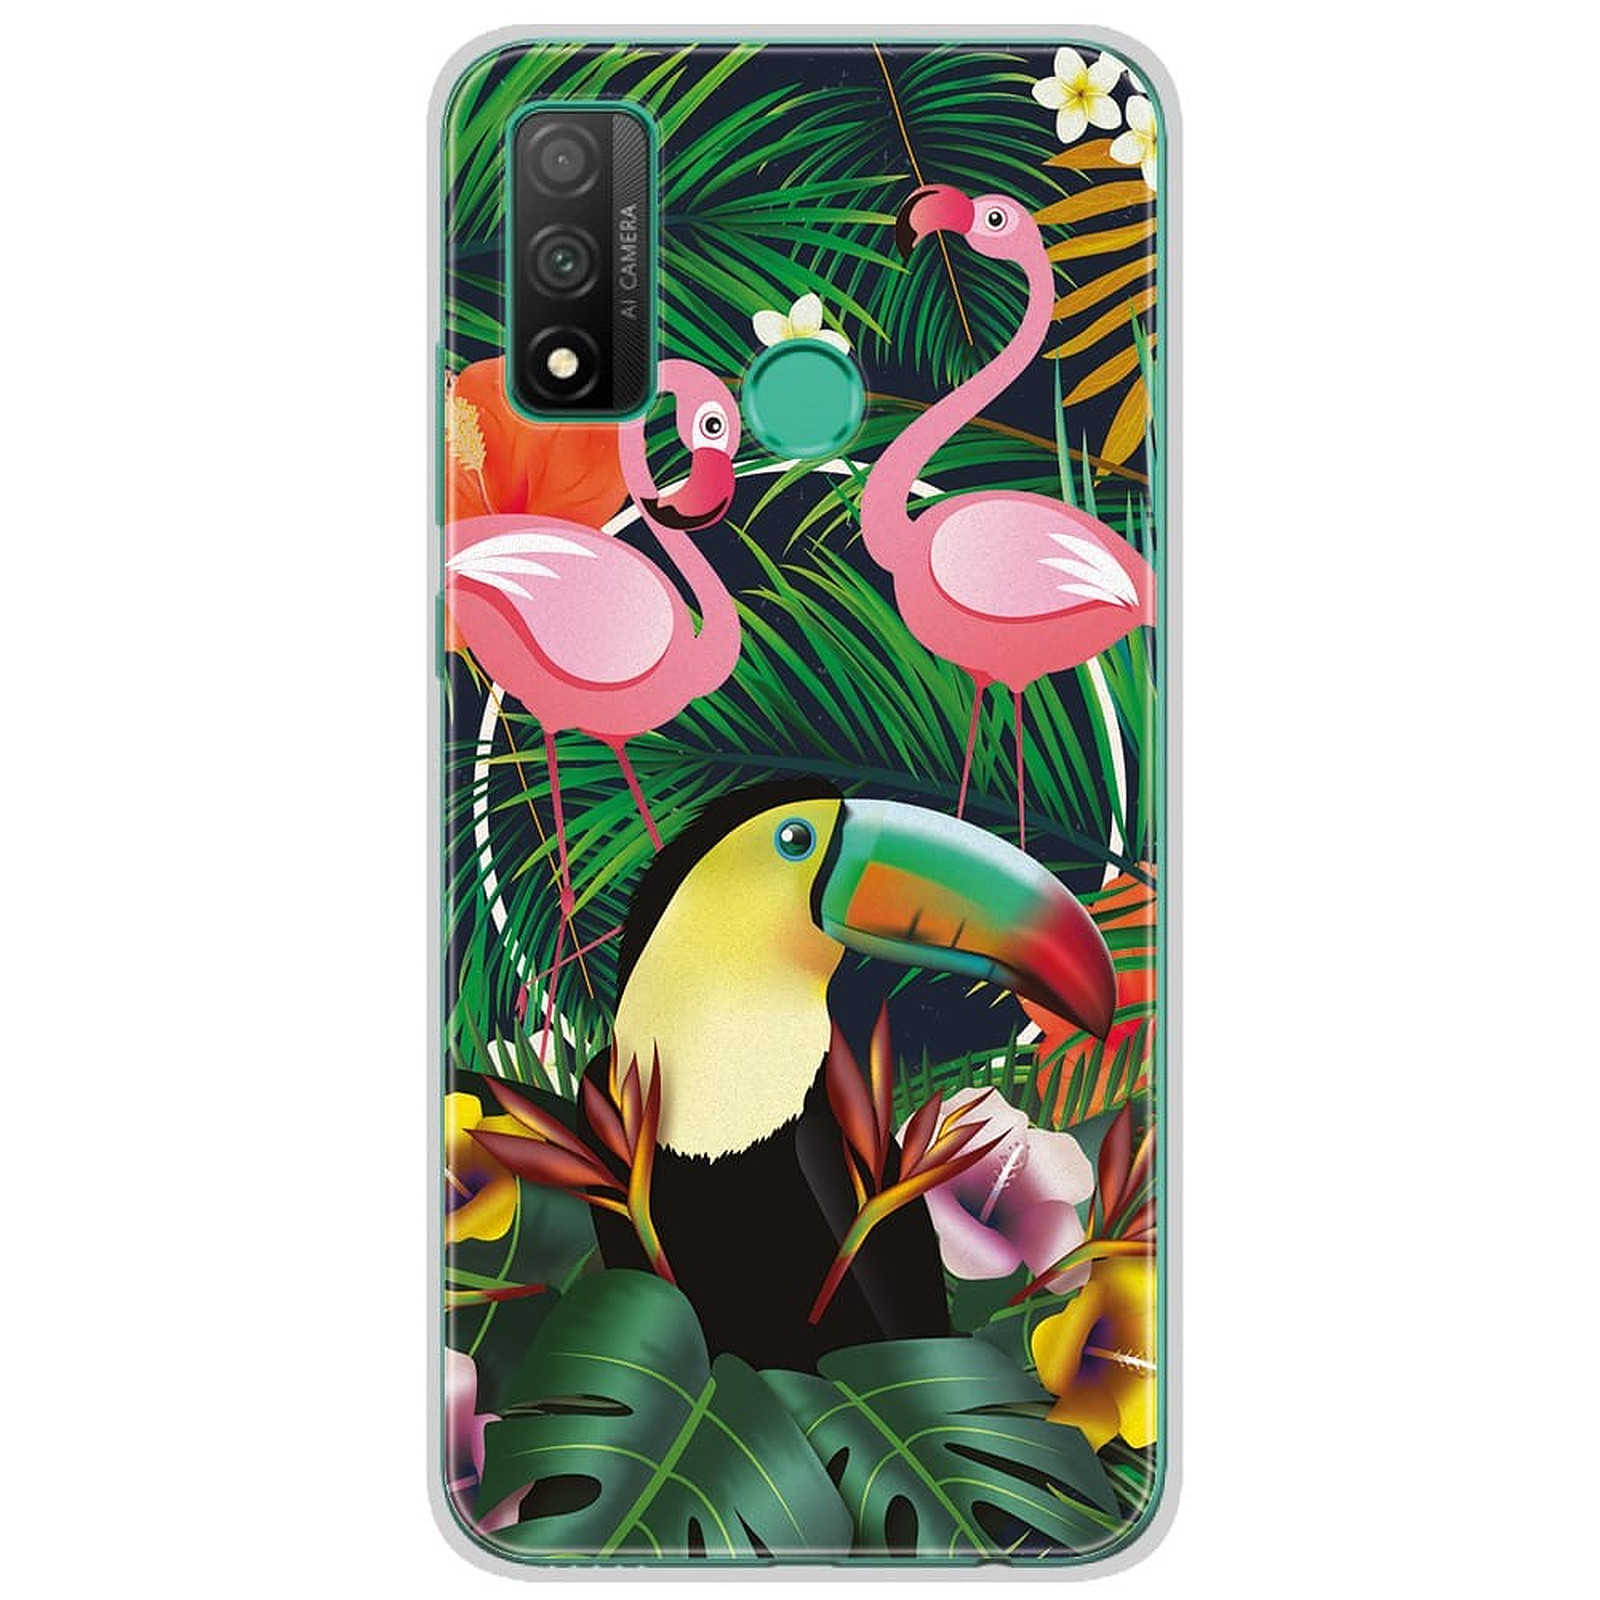 1001 Coques Coque silicone gel Huawei P Smart 2020 motif Tropical Toucan - Coque telephone 1001Coques